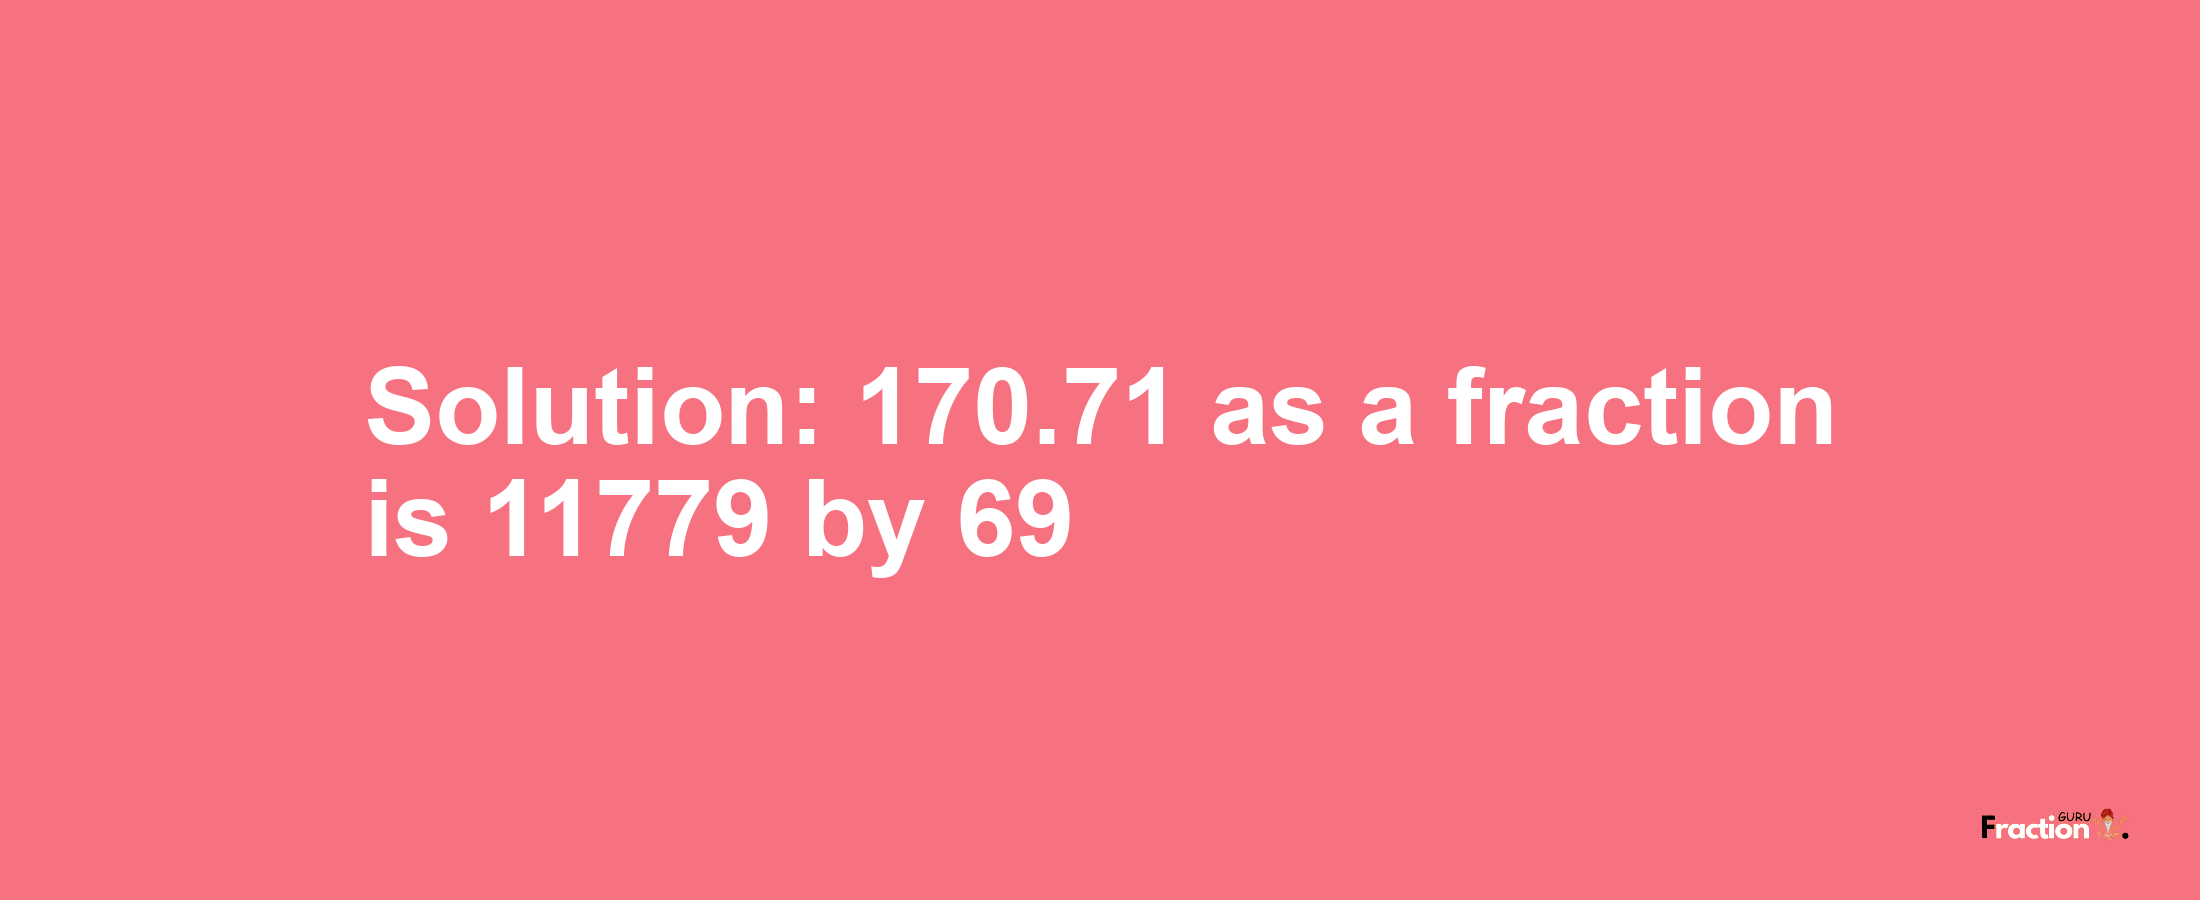 Solution:170.71 as a fraction is 11779/69